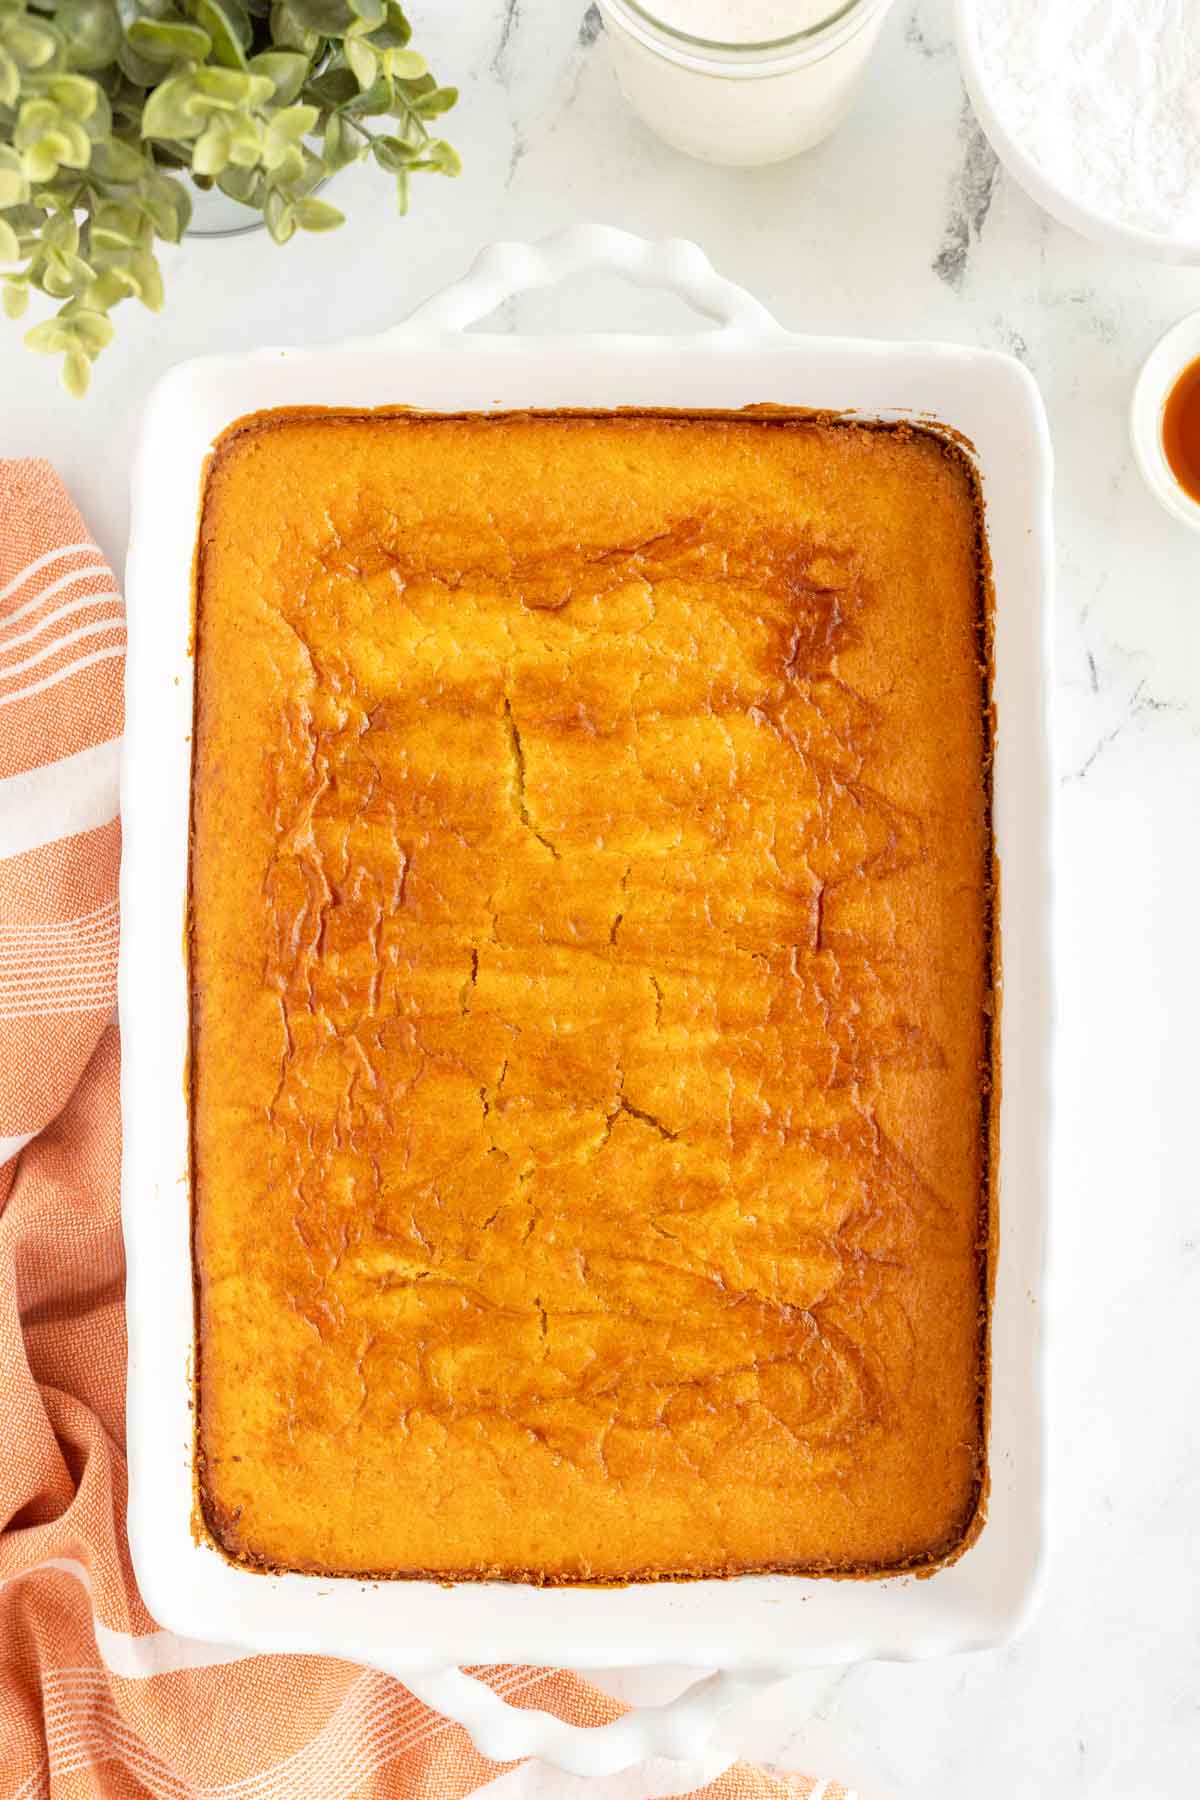 baked pumpkin magic cake without frosting